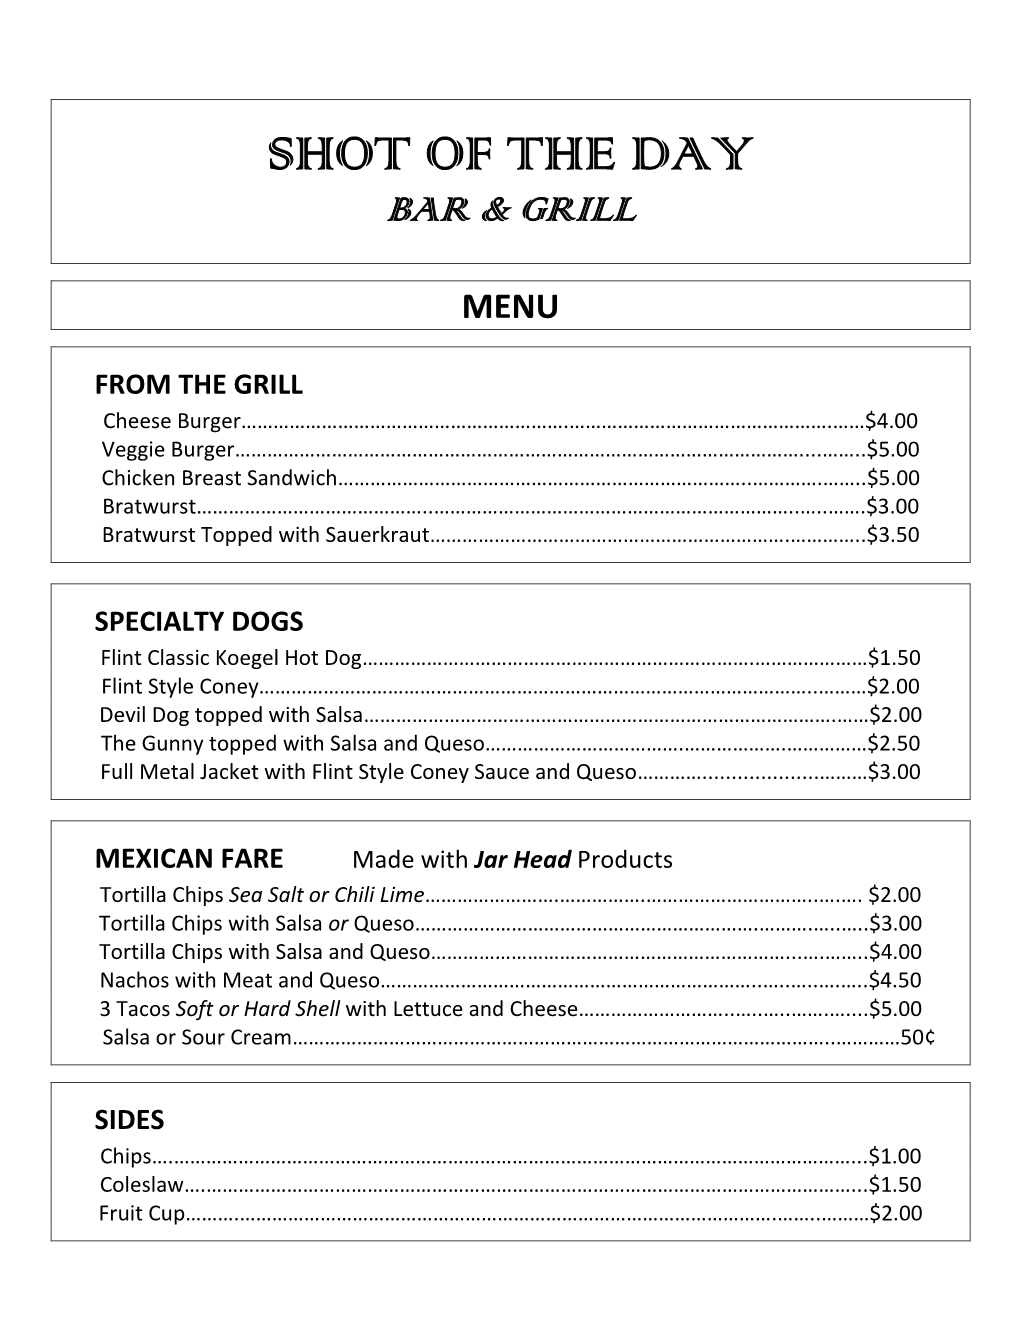 Shot of the Day Bar & Grill